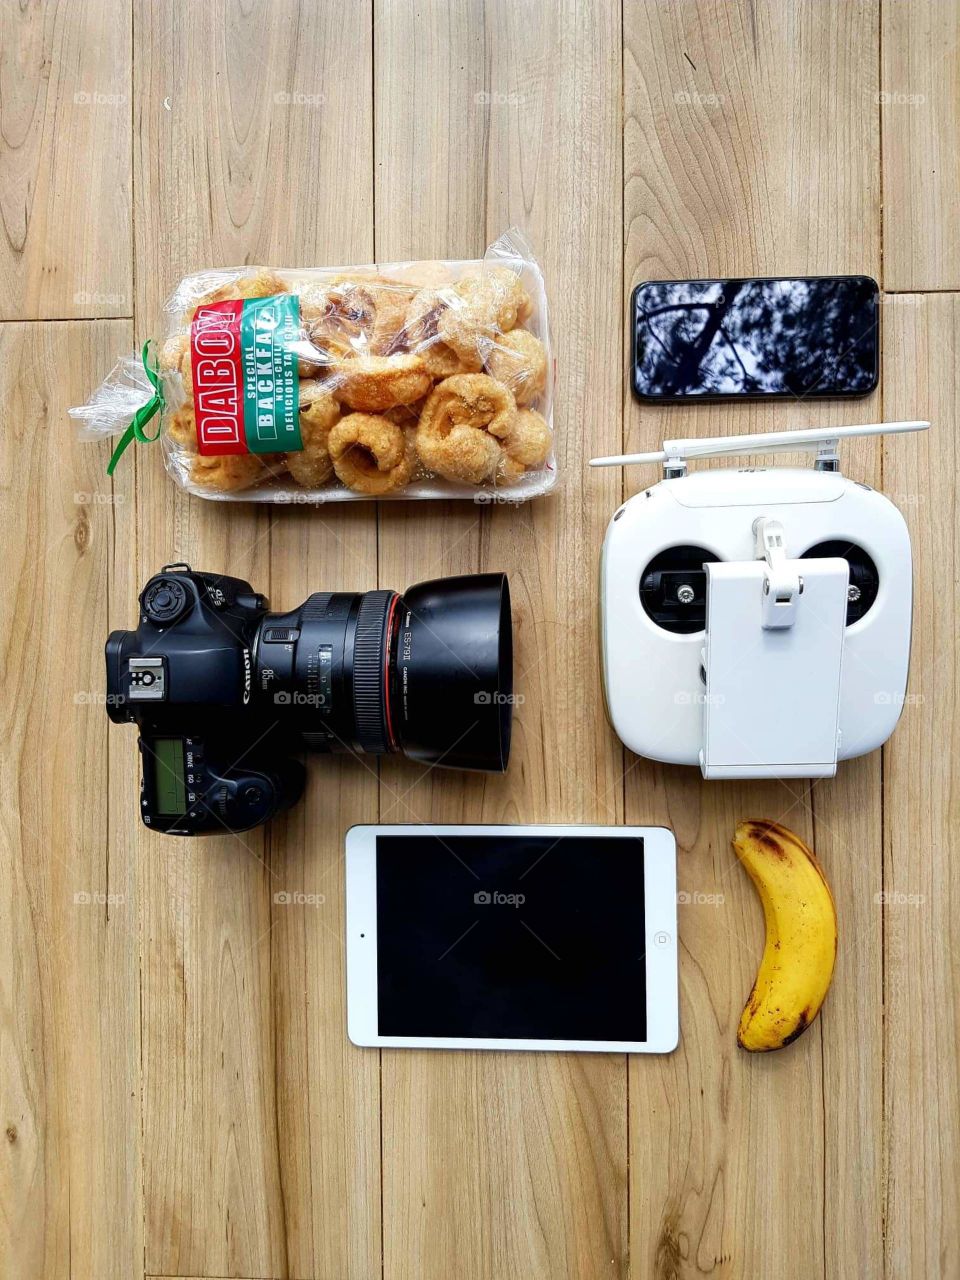 Gadgets and snacks on the table.